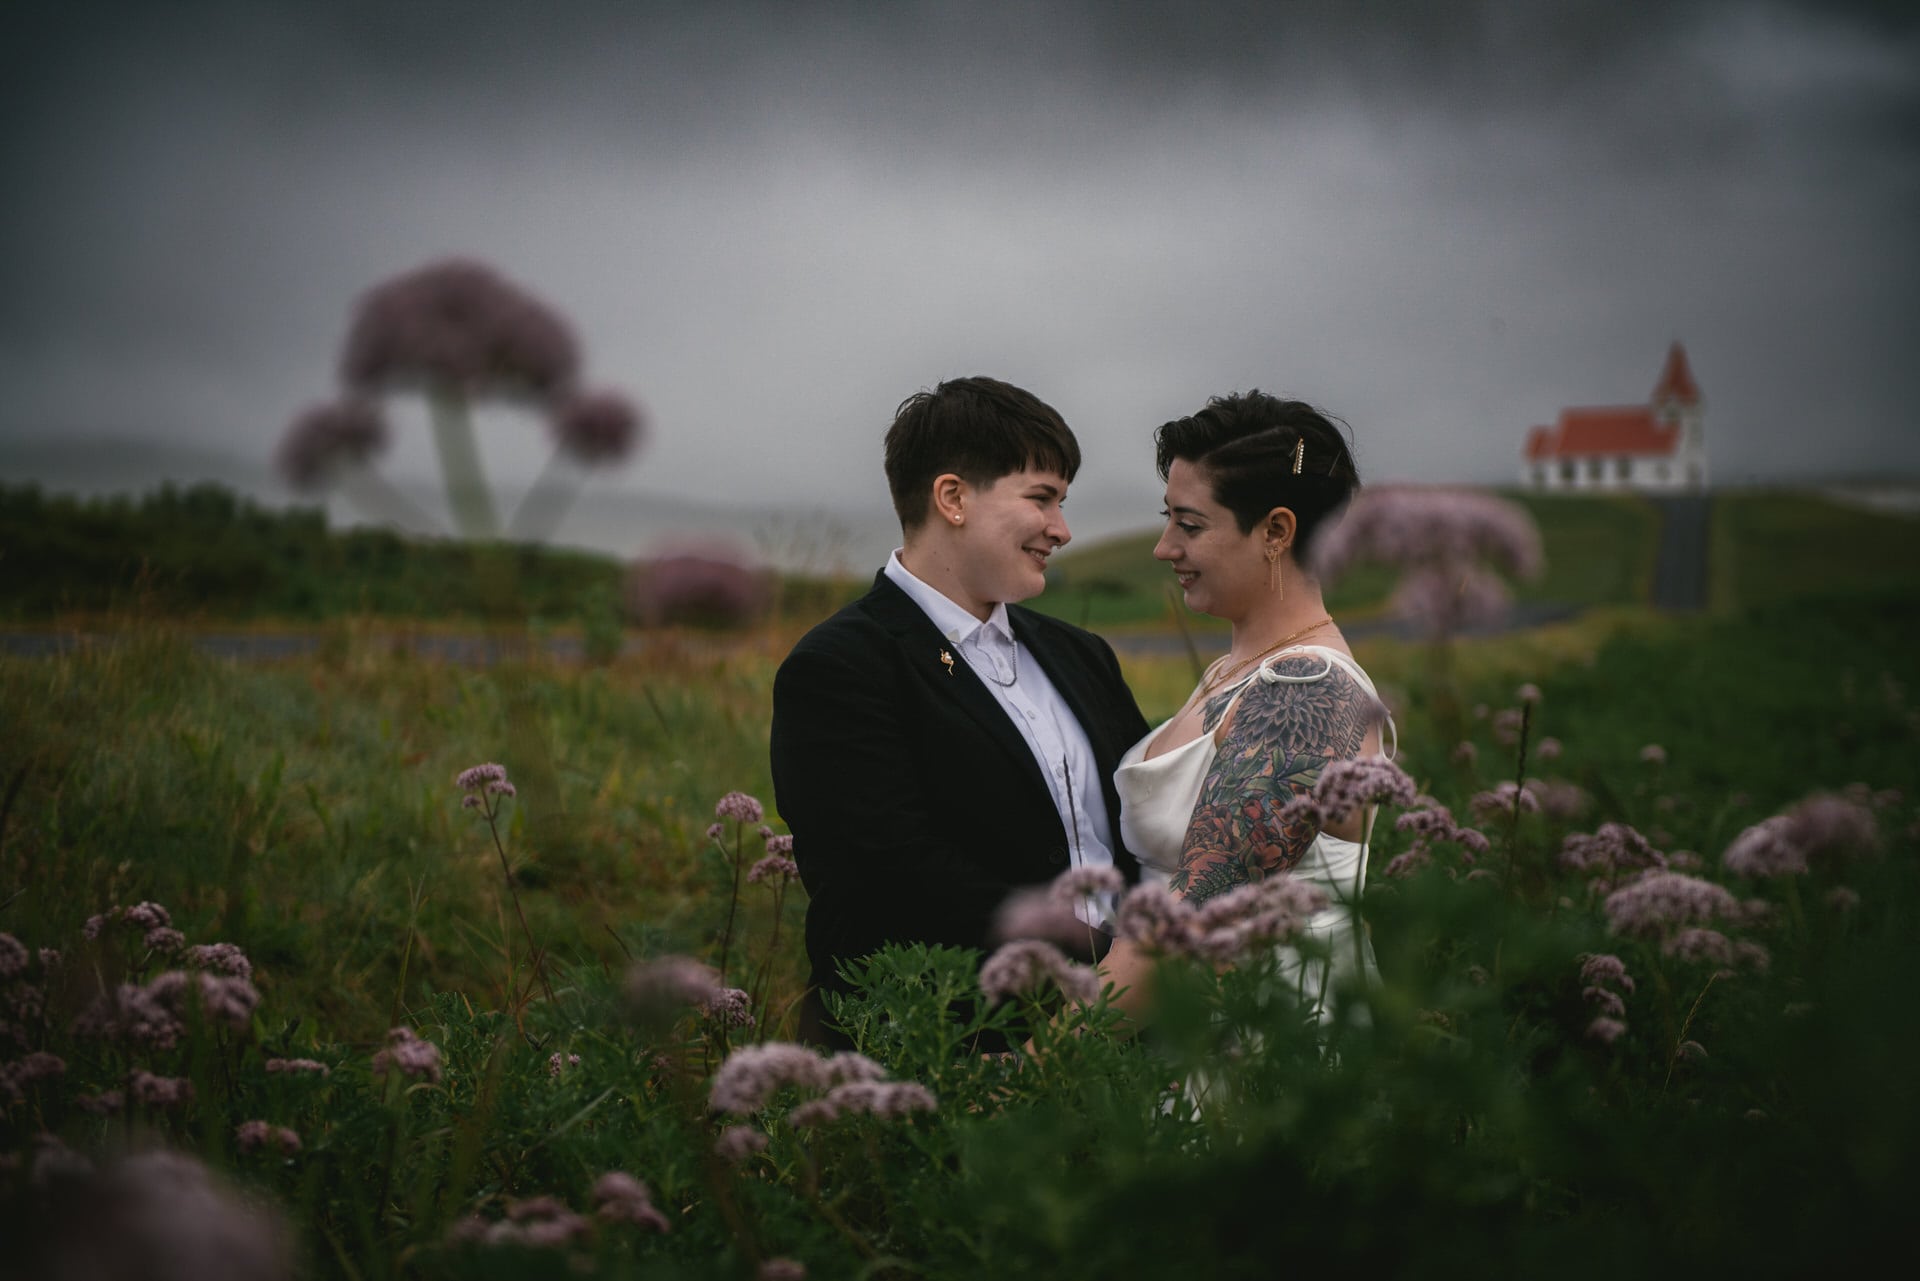 Same-sex couple looking at each other in a field of flowers on a rainy day